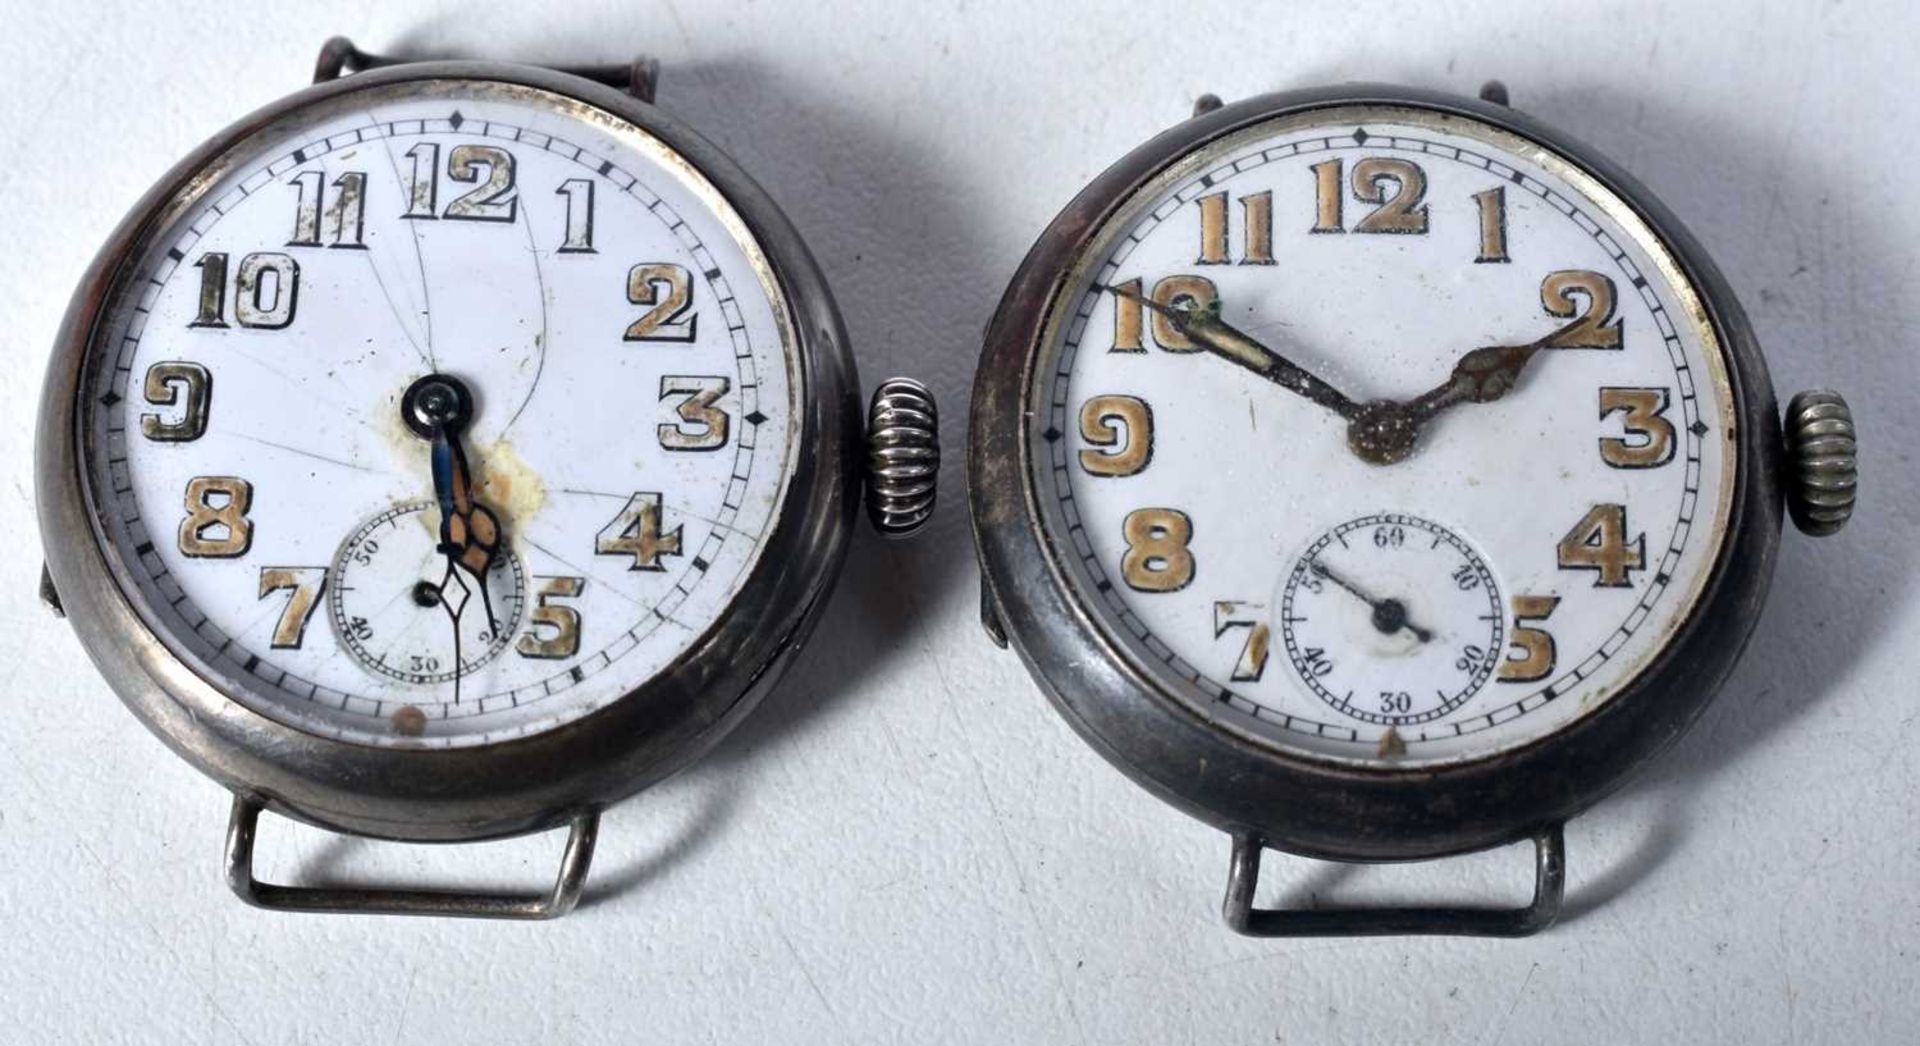 Two Silver Cased Gents Trench Style WRISTWATCHES. Cases Stamped 925. Hand-Wind. WORKING - Tested For